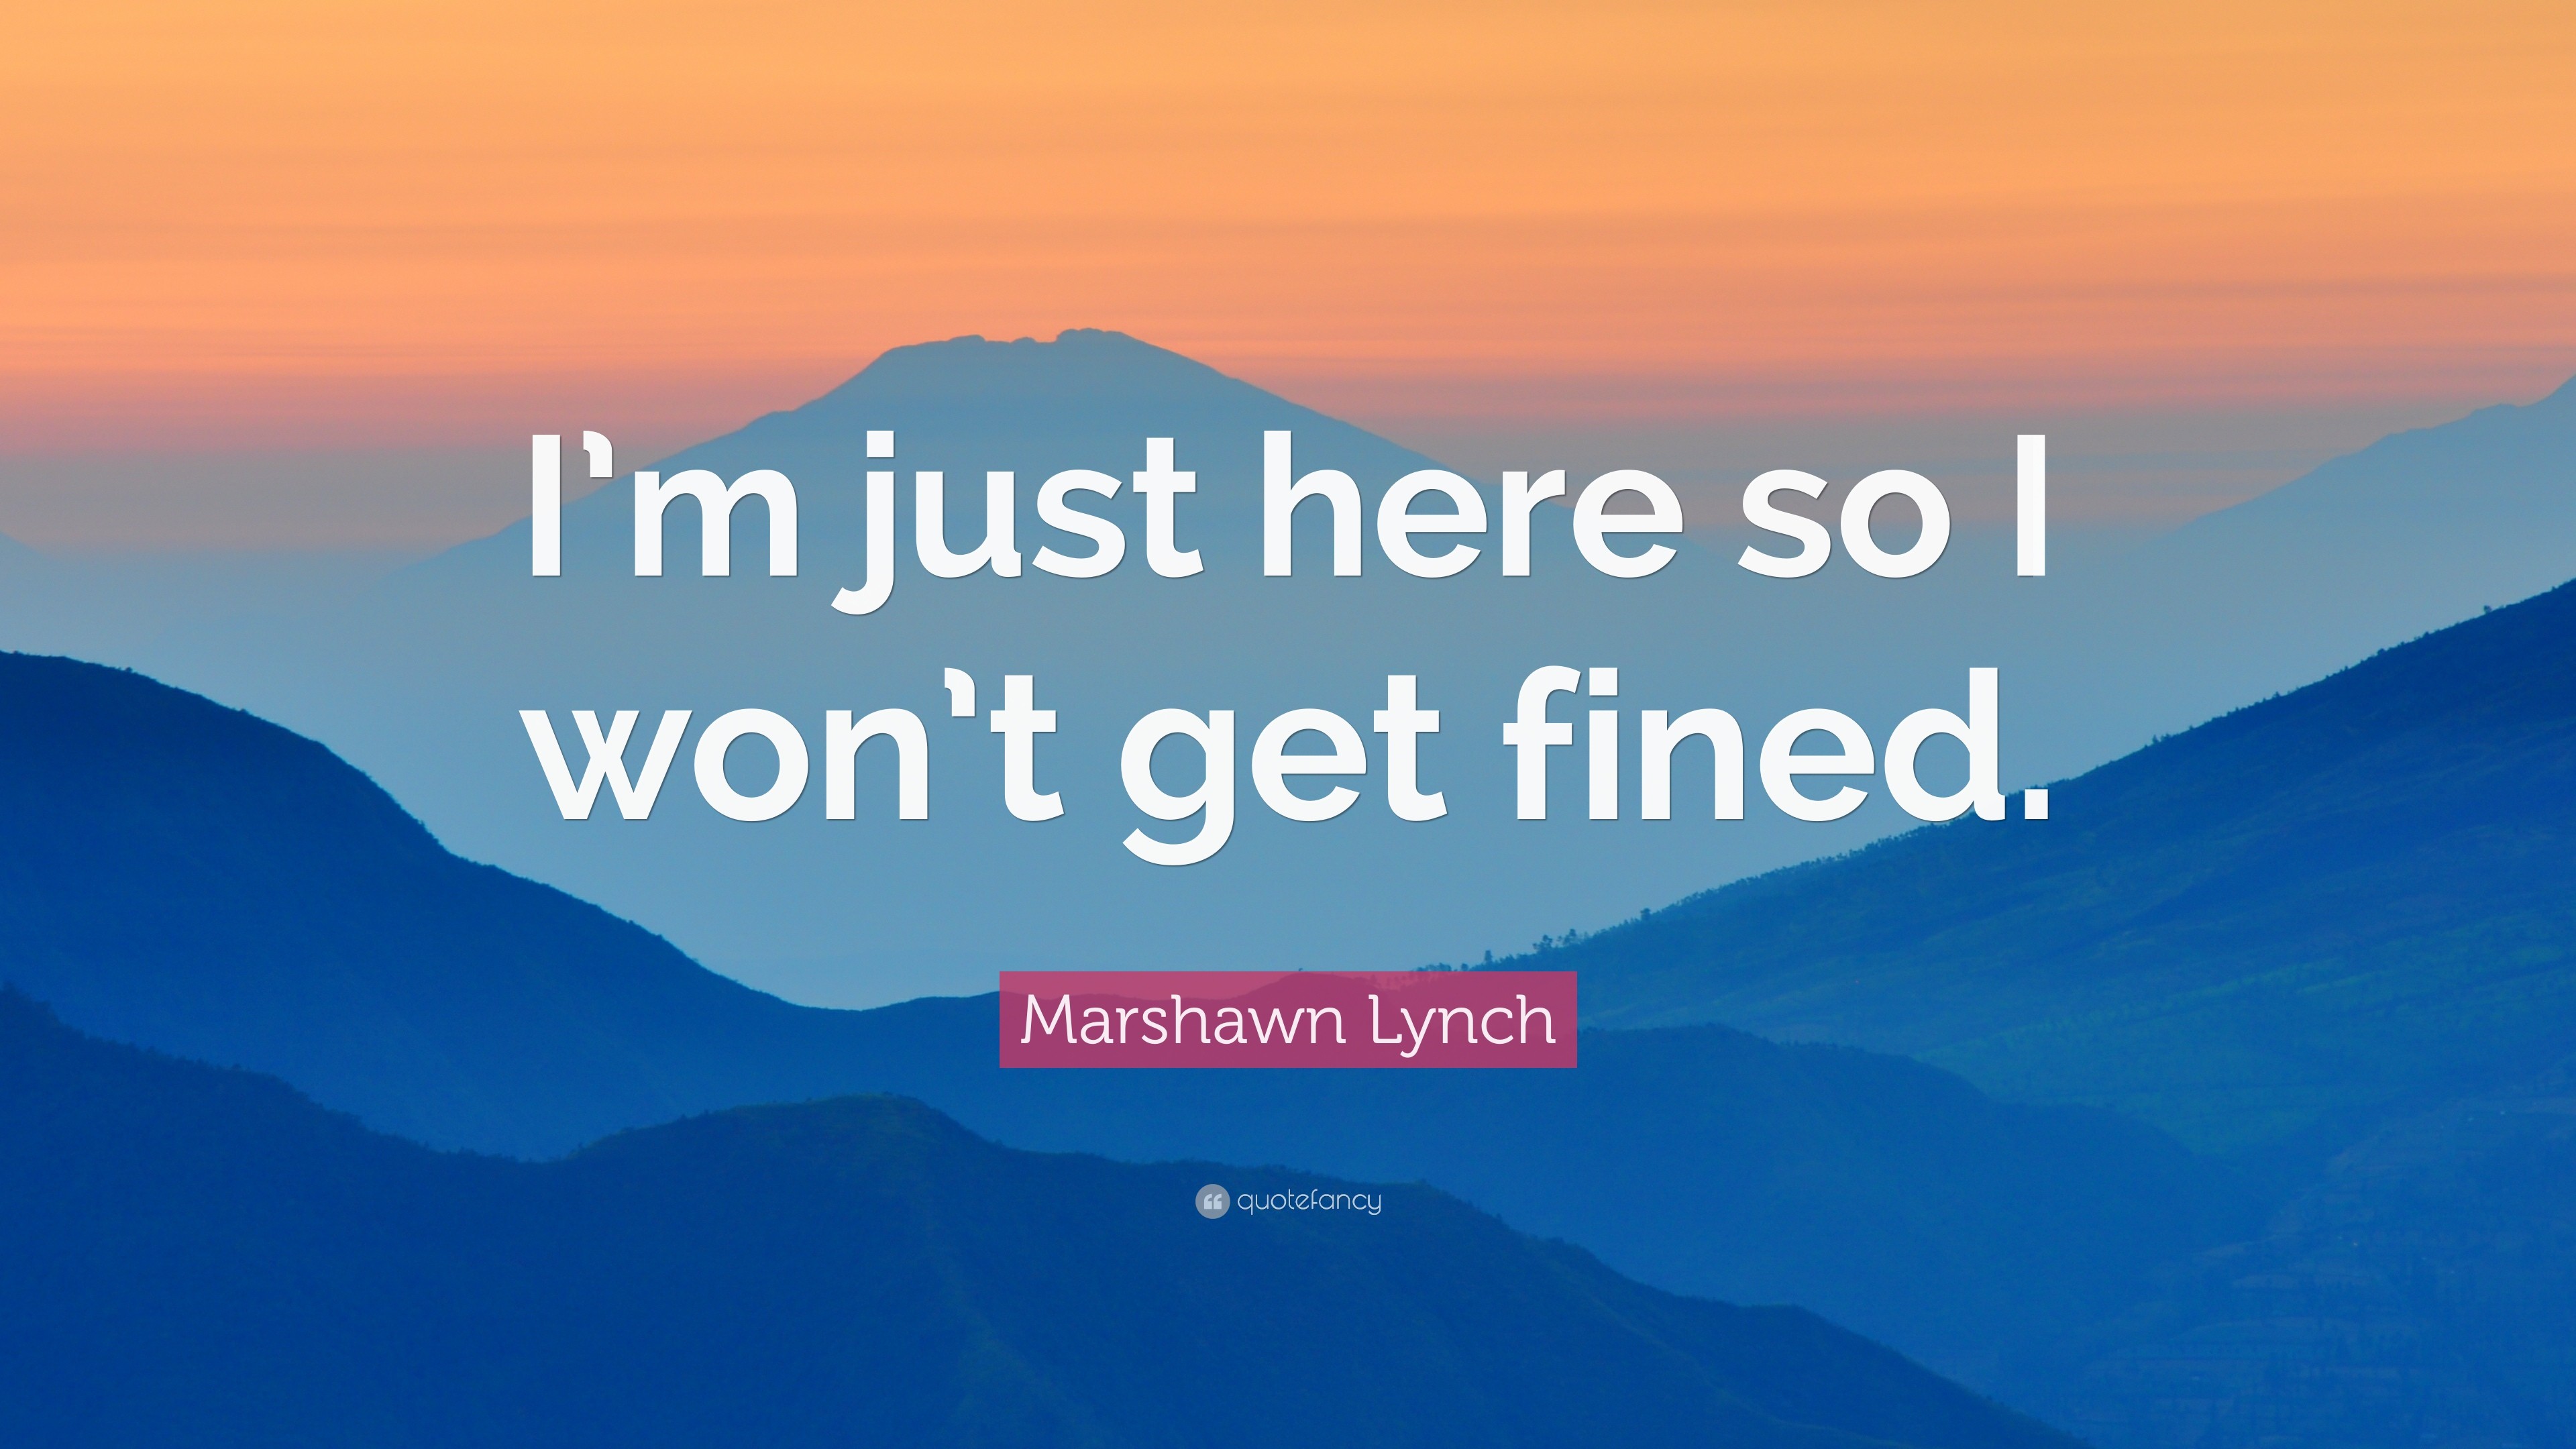 3840x2160 Marshawn Lynch Quote: “I'm just here so I won't get